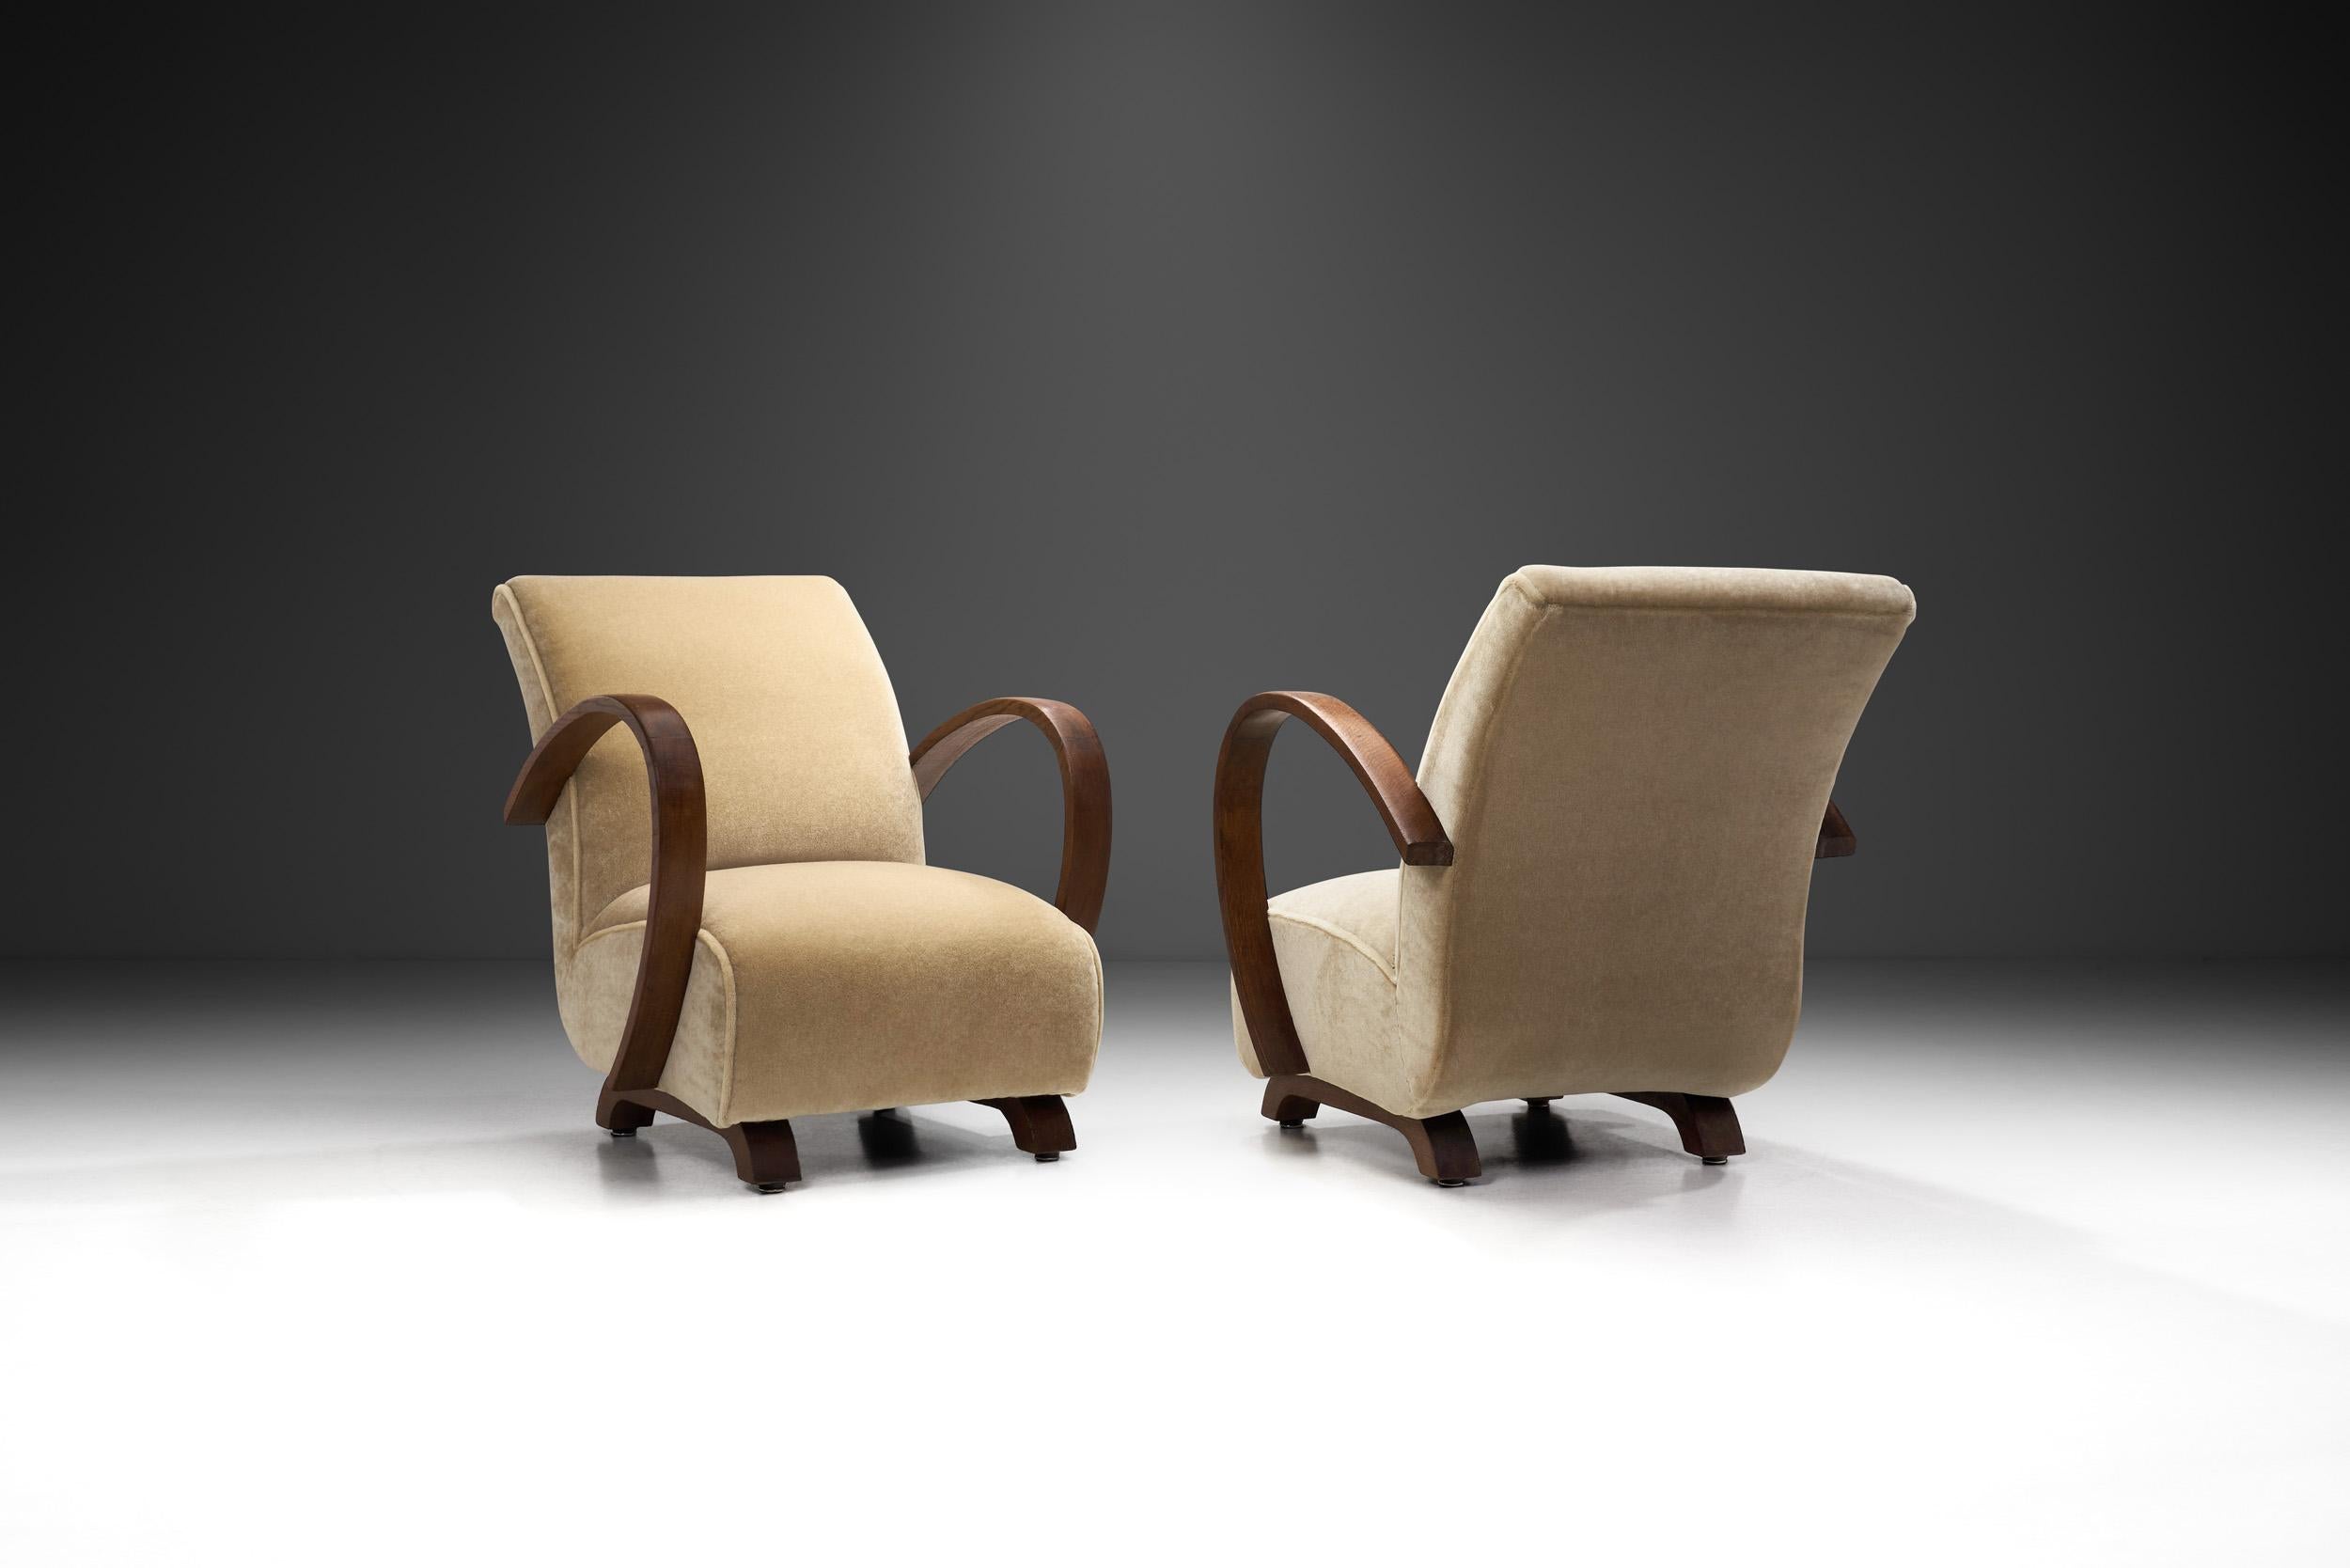 This pair of rare Jindřich Halabala lounge chairs feature the world-famous Czech designer’s most well-known design element: the steam bent, curved arms. This model exemplifies why Halabala's work is considered to be a connection between innovative